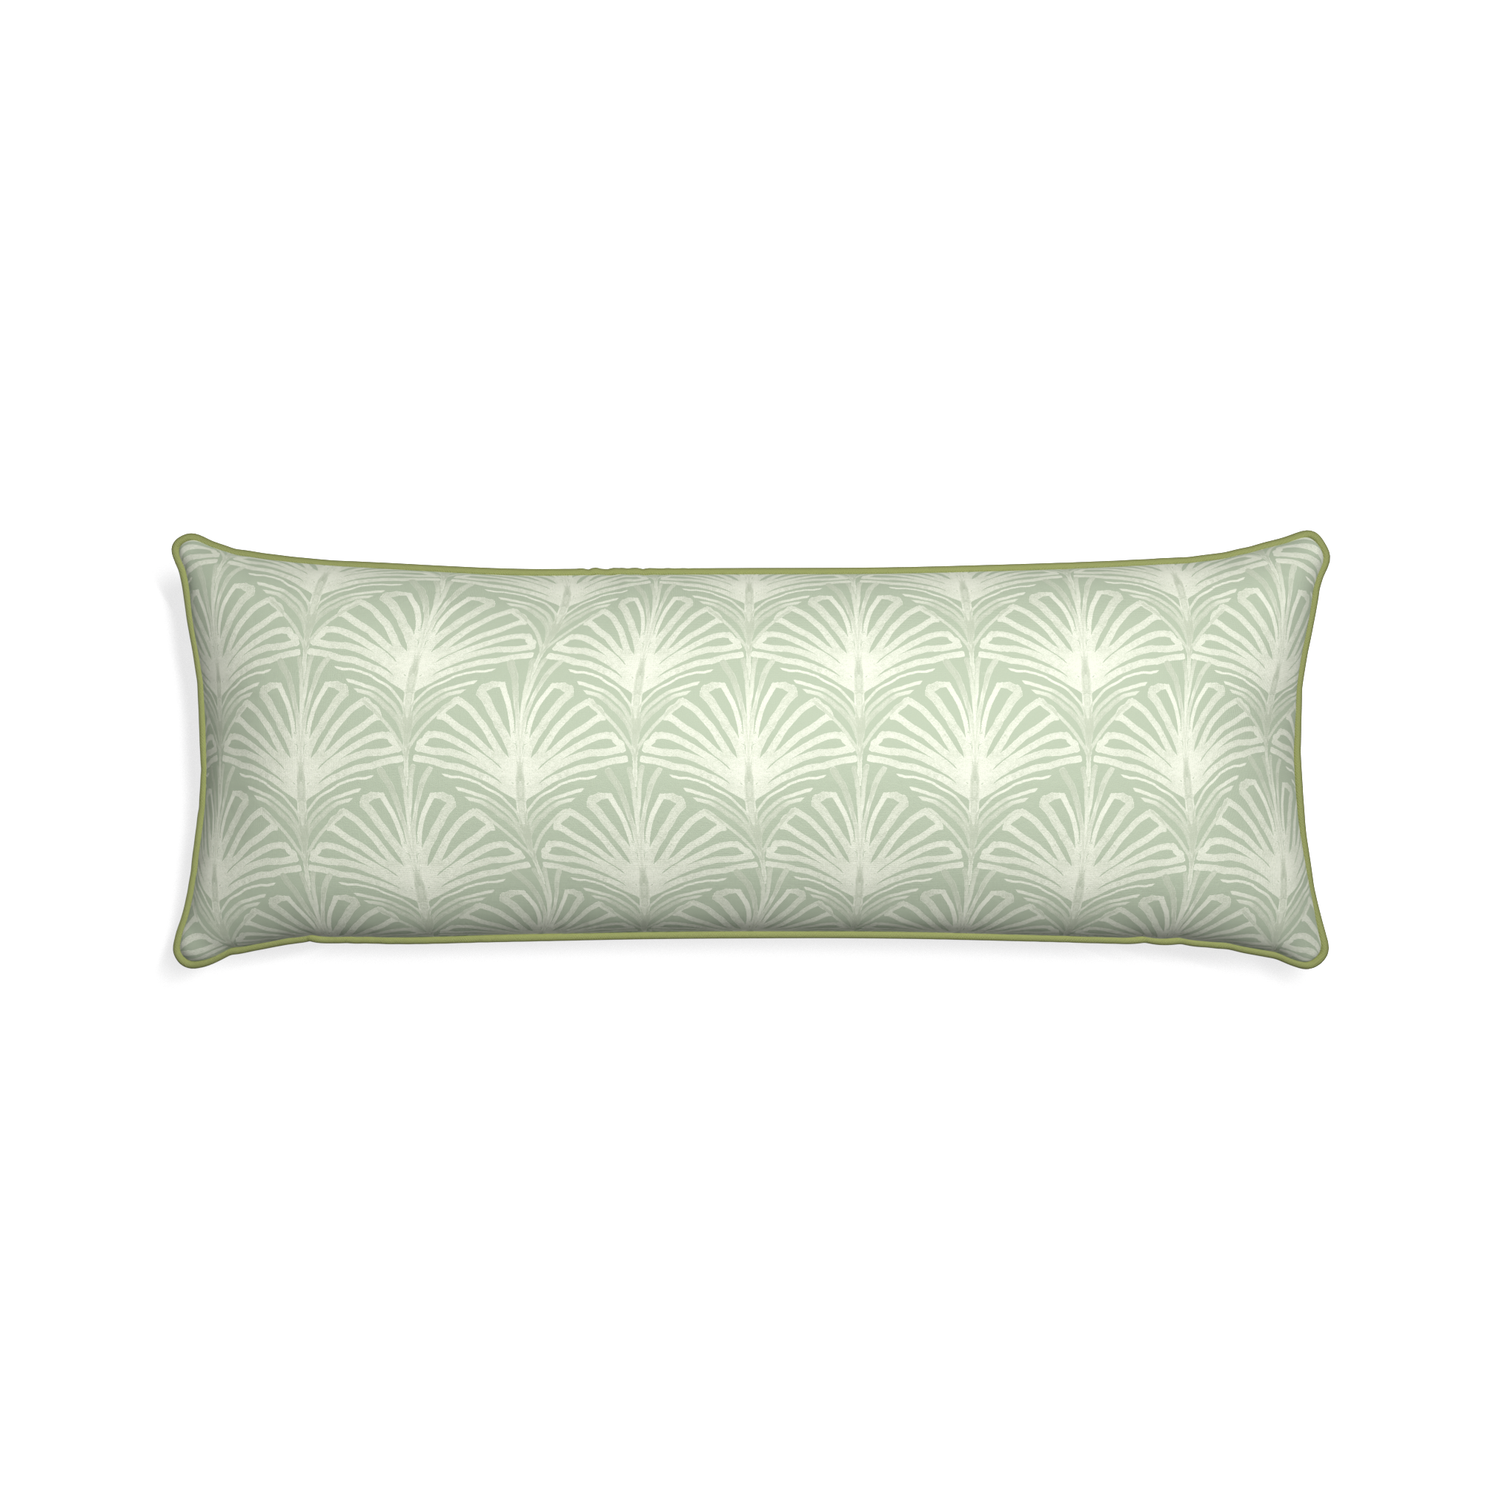 Xl-lumbar suzy sage custom pillow with moss piping on white background